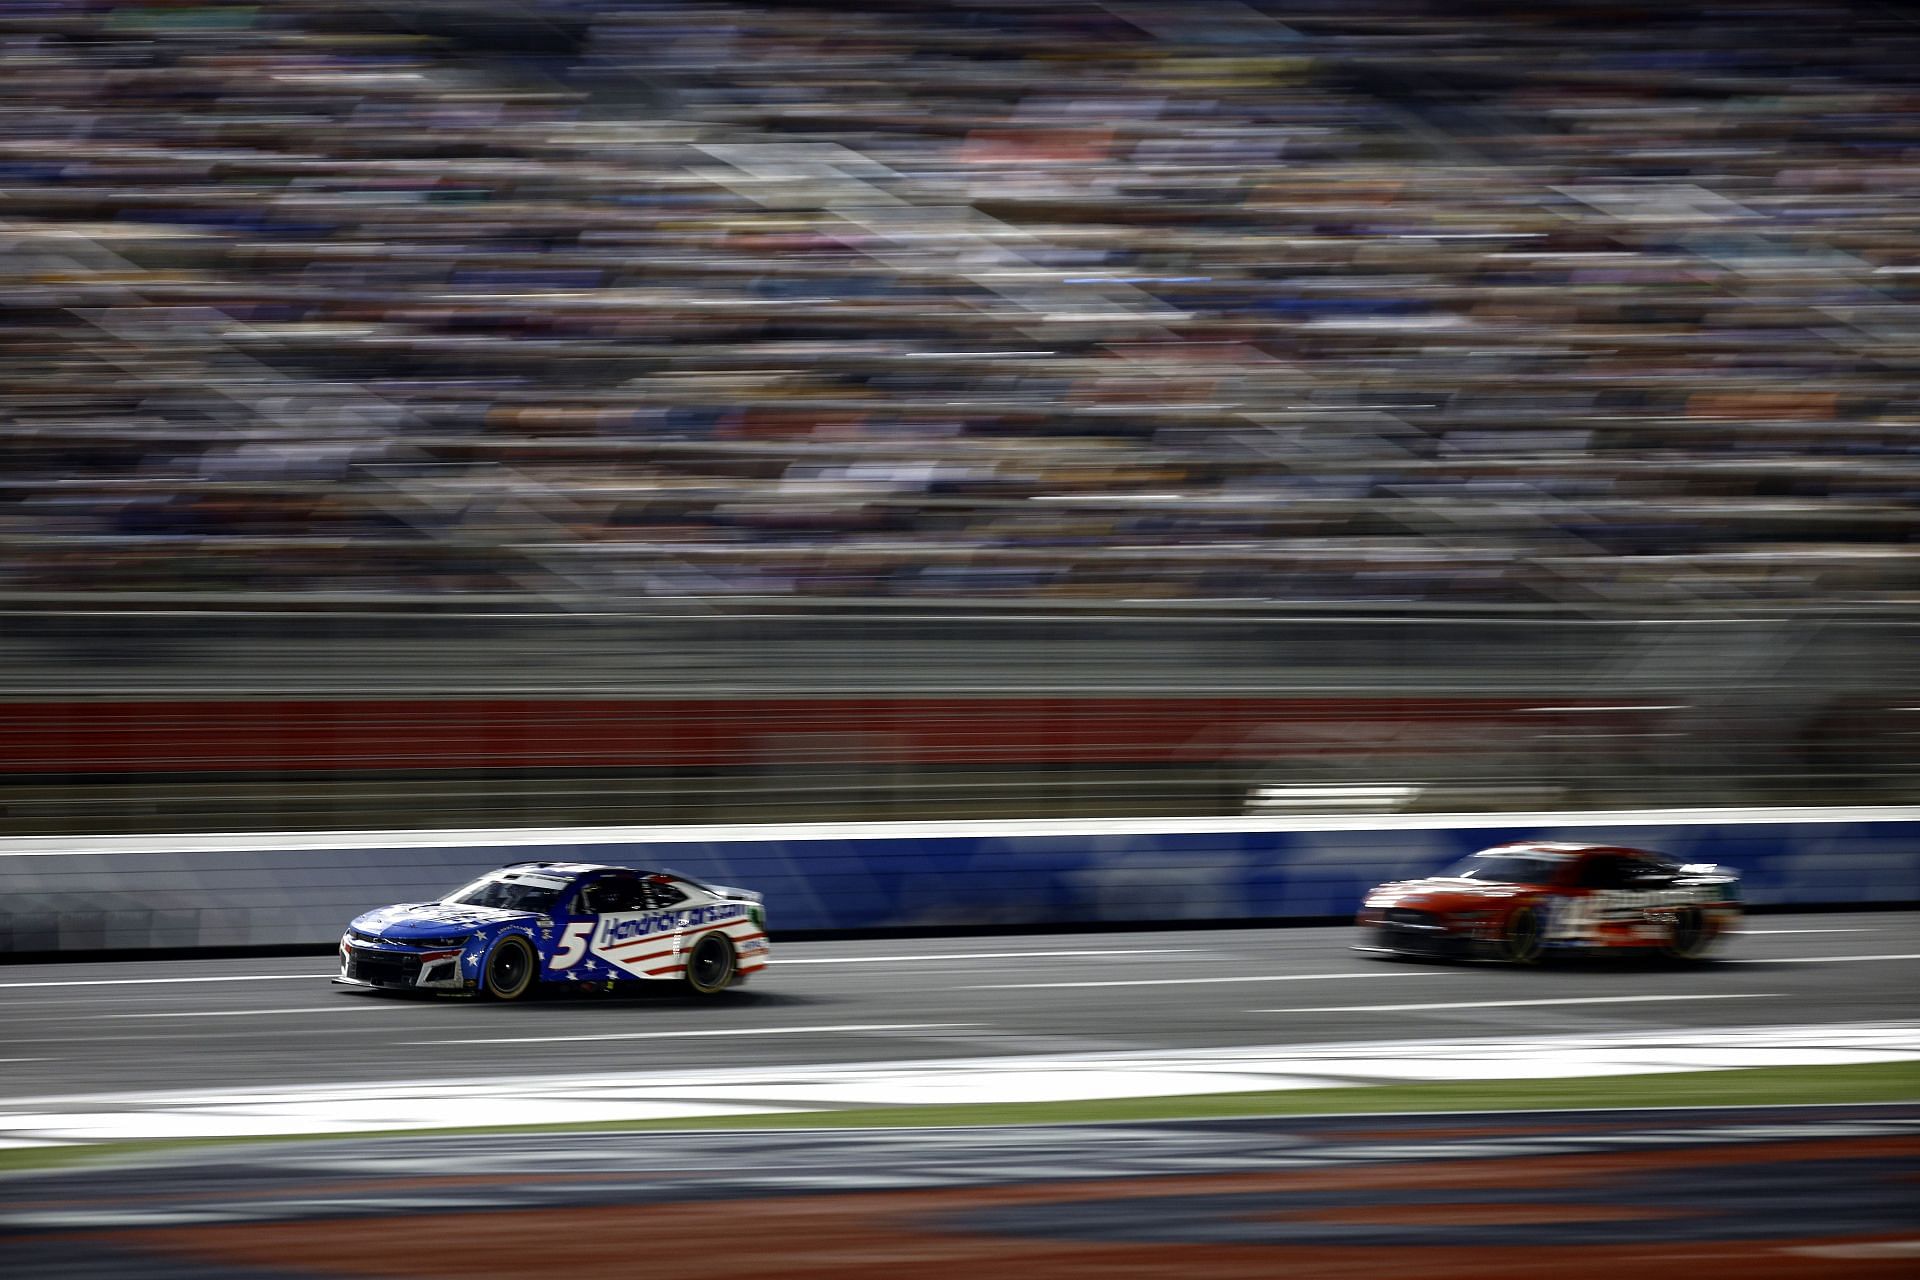 Kyle Larson drives during the NASCAR Cup Series Coca-Cola 600 at Charlotte Motor Speedway (Photo by Jared C. Tilton/Getty Images)